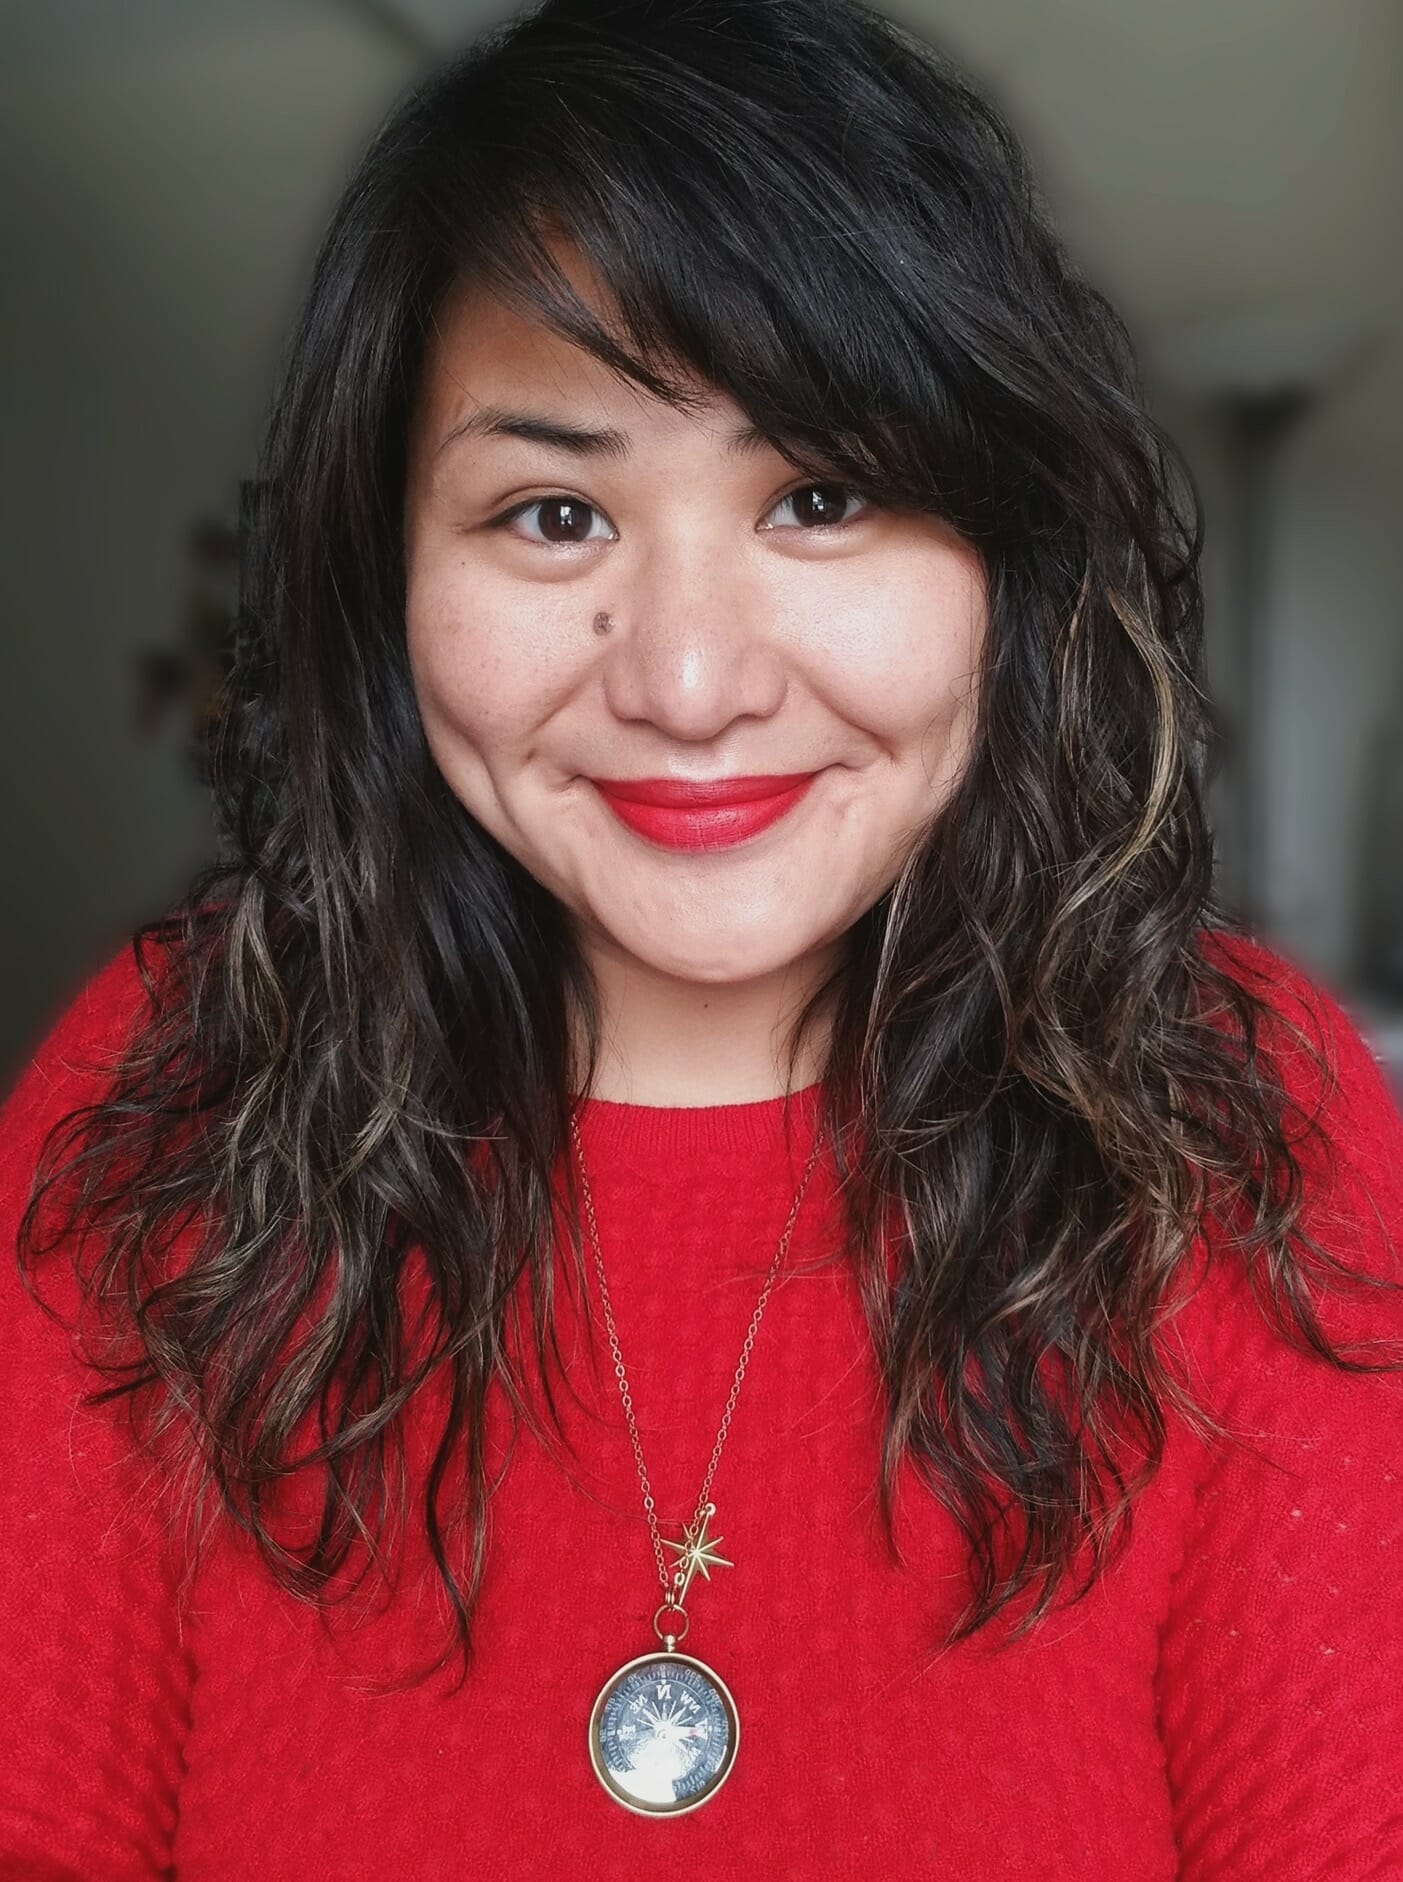 Trish Fontanilla Headshot. Trish is looking straight to camera, and wearing a compass necklace and red sweater.